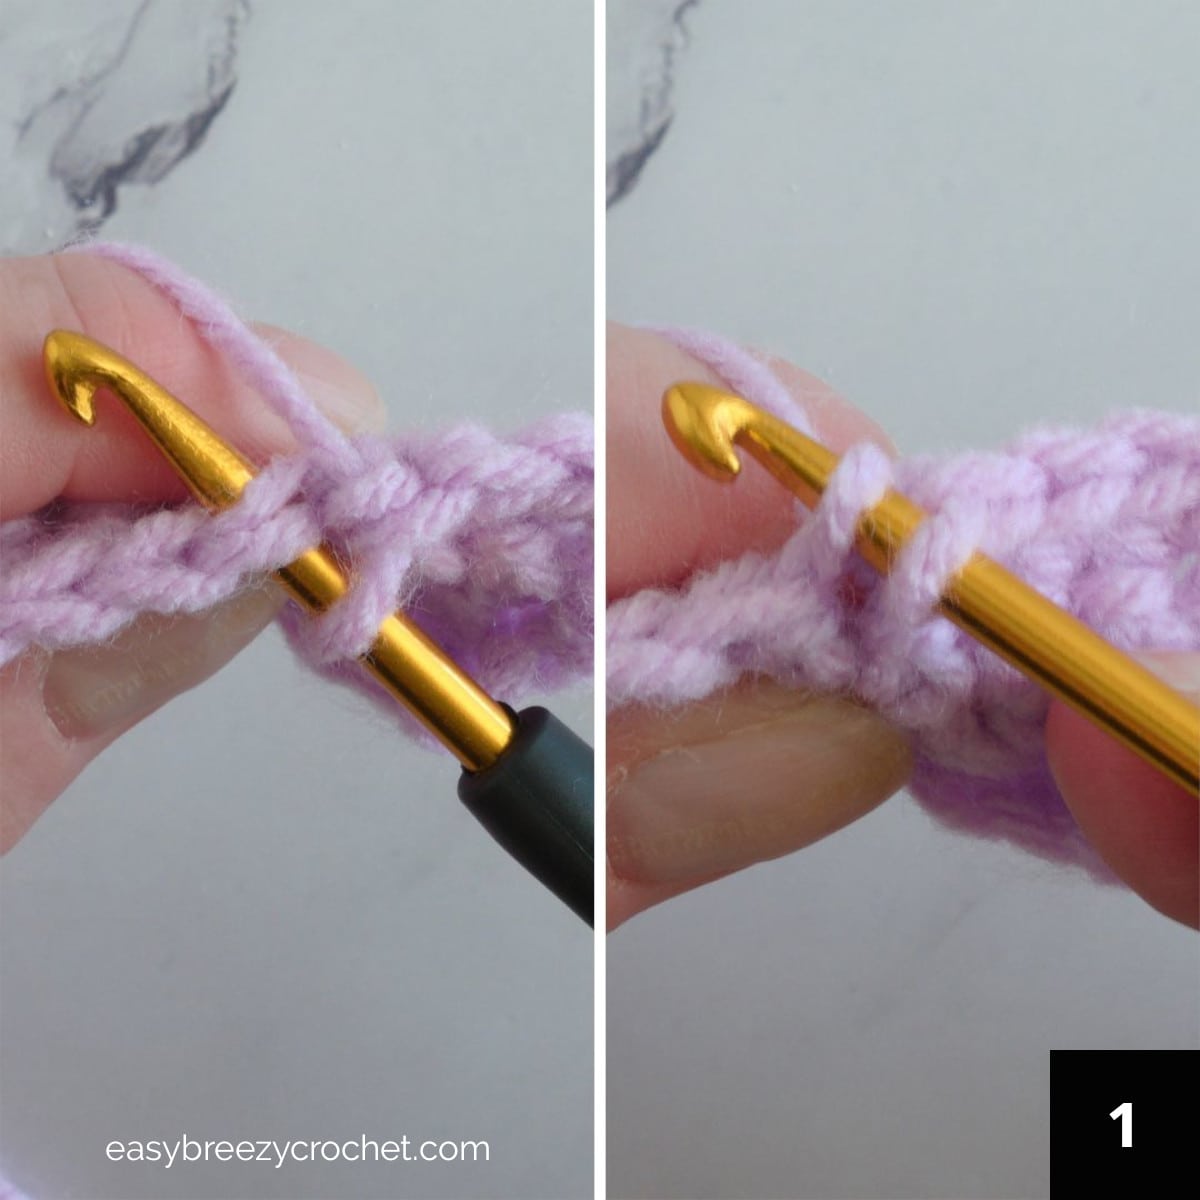 Step one of how to make a single crochet decrease.